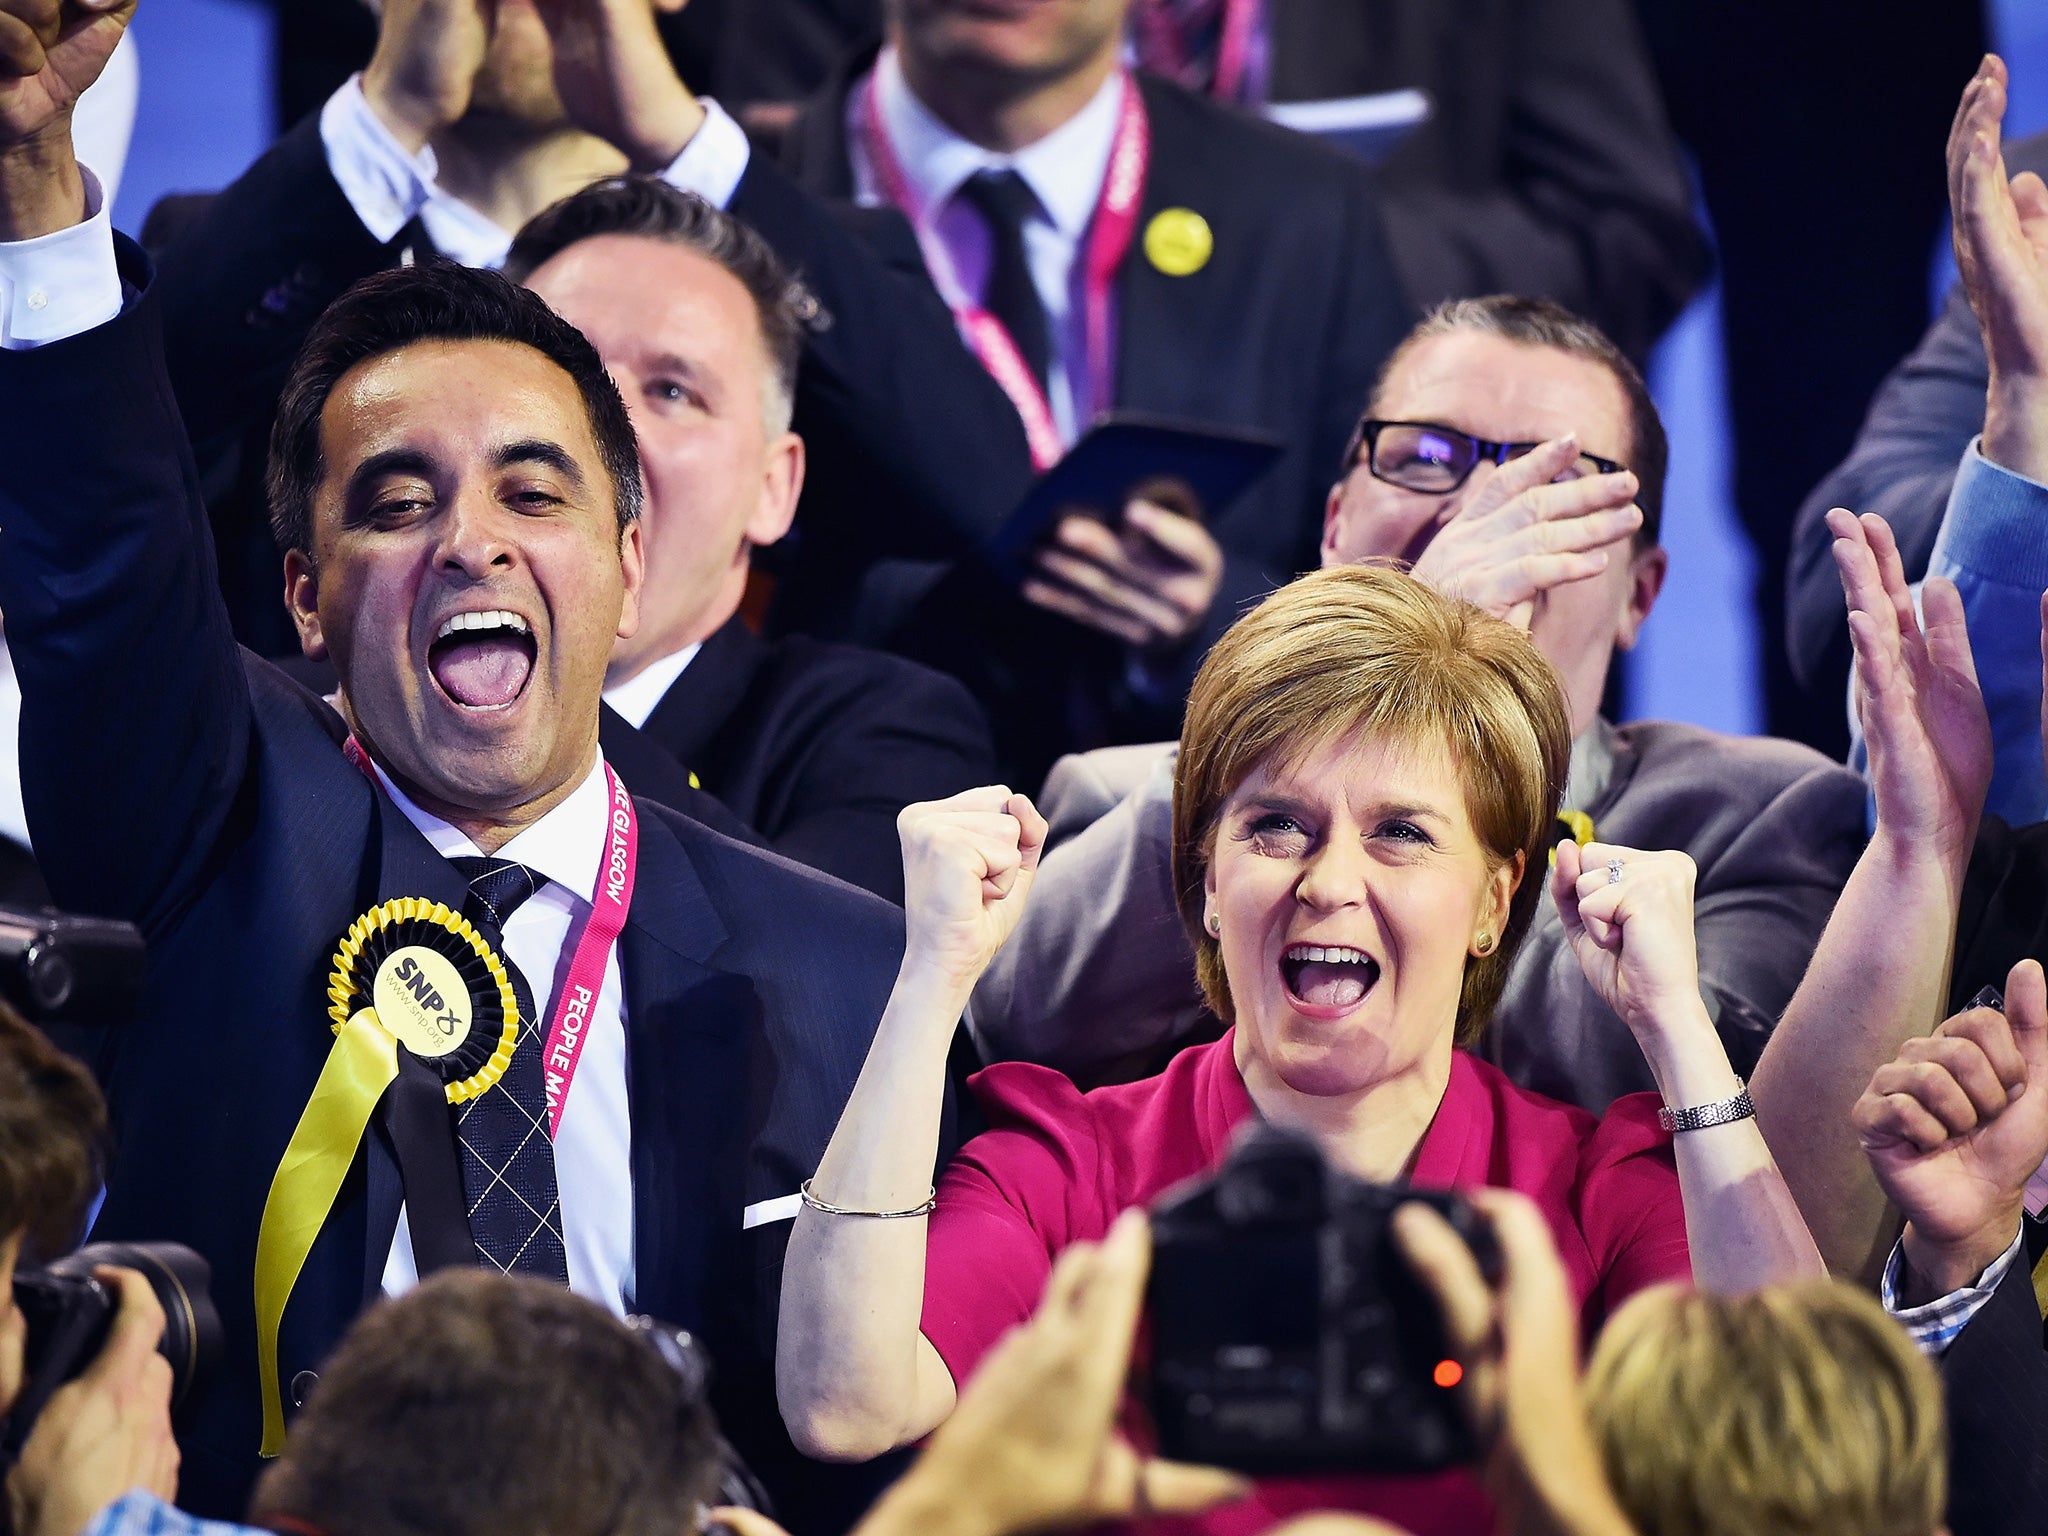 Nicola Sturgeon, leader of the SNP, celebrates after the landslide victory in Glasgow yesterday morning